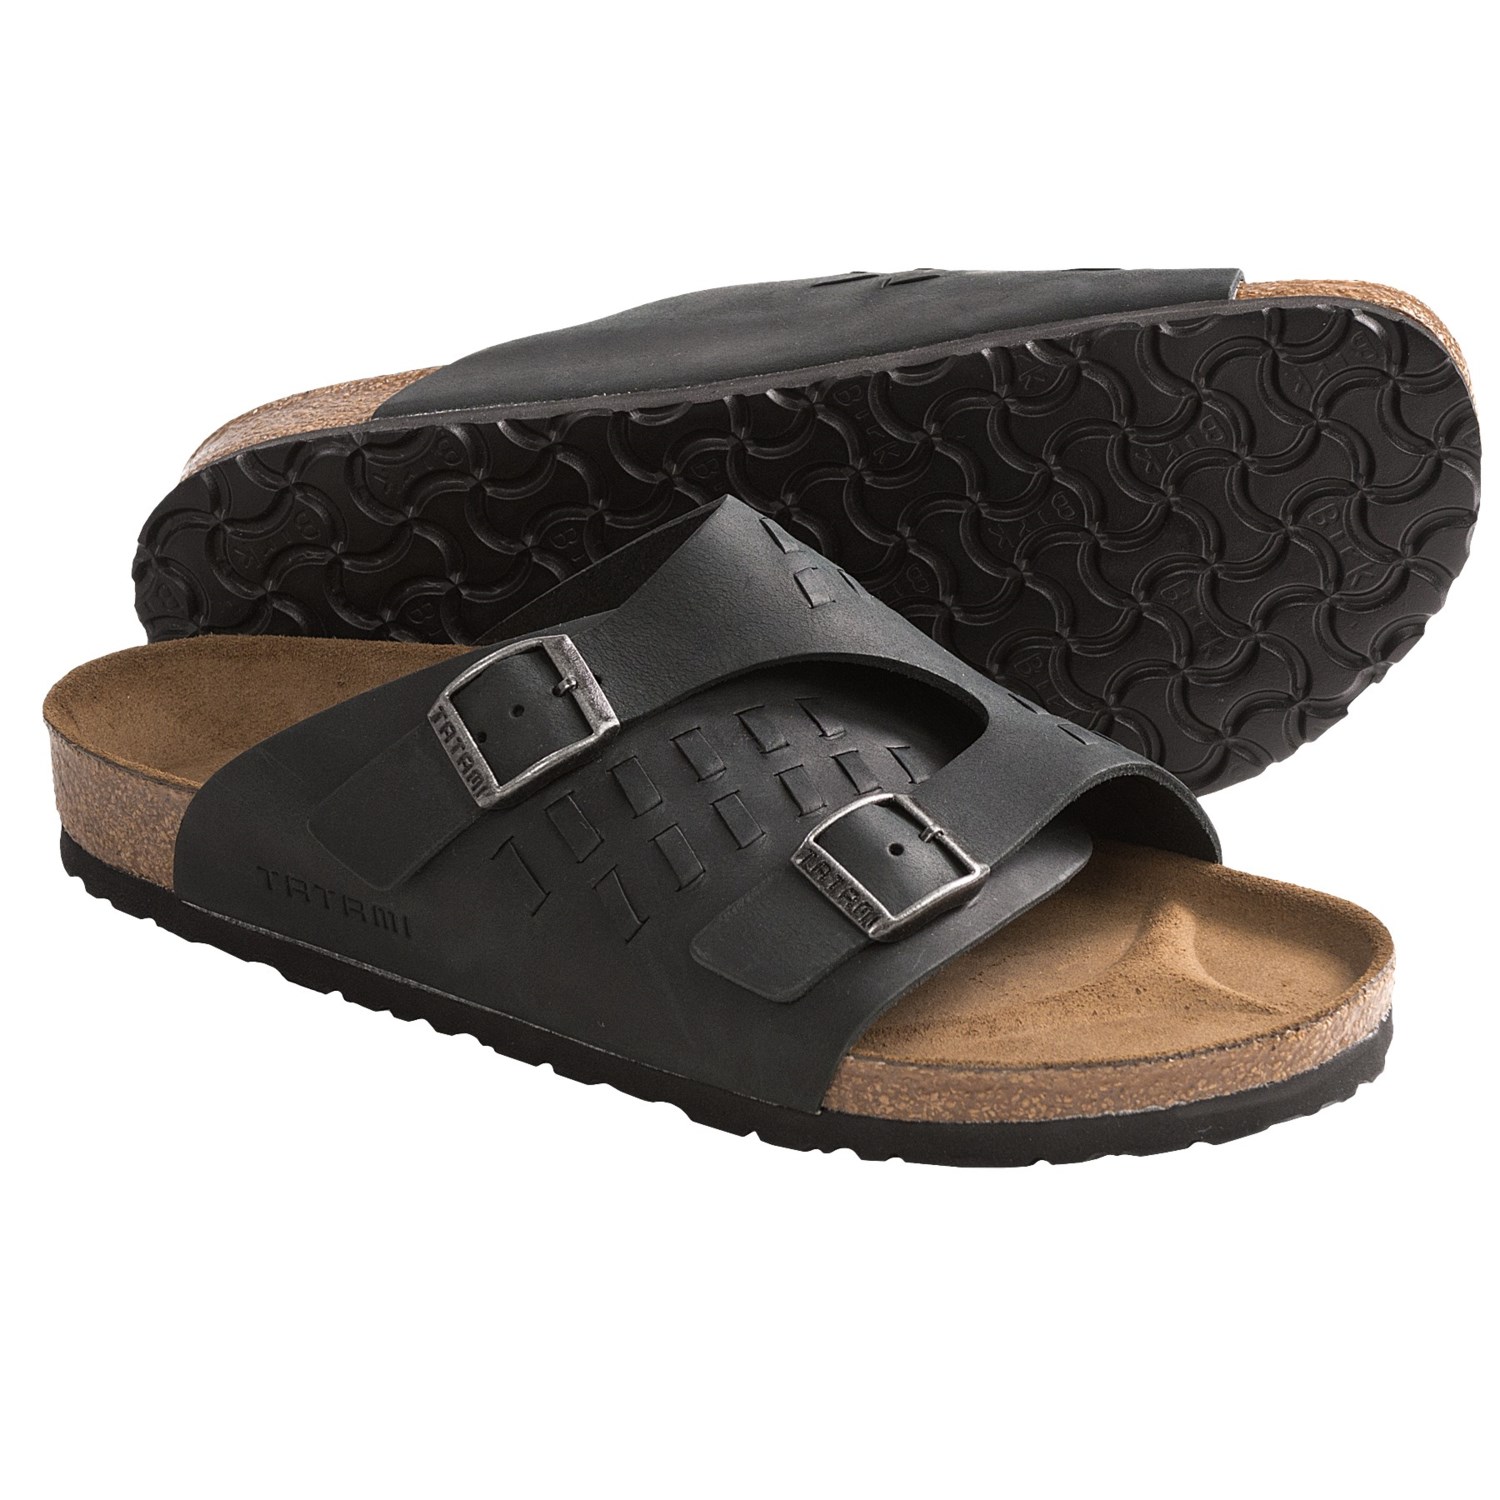 Tatami by Birkenstock Zurich Sandals - Oiled Leather (For Men and ...